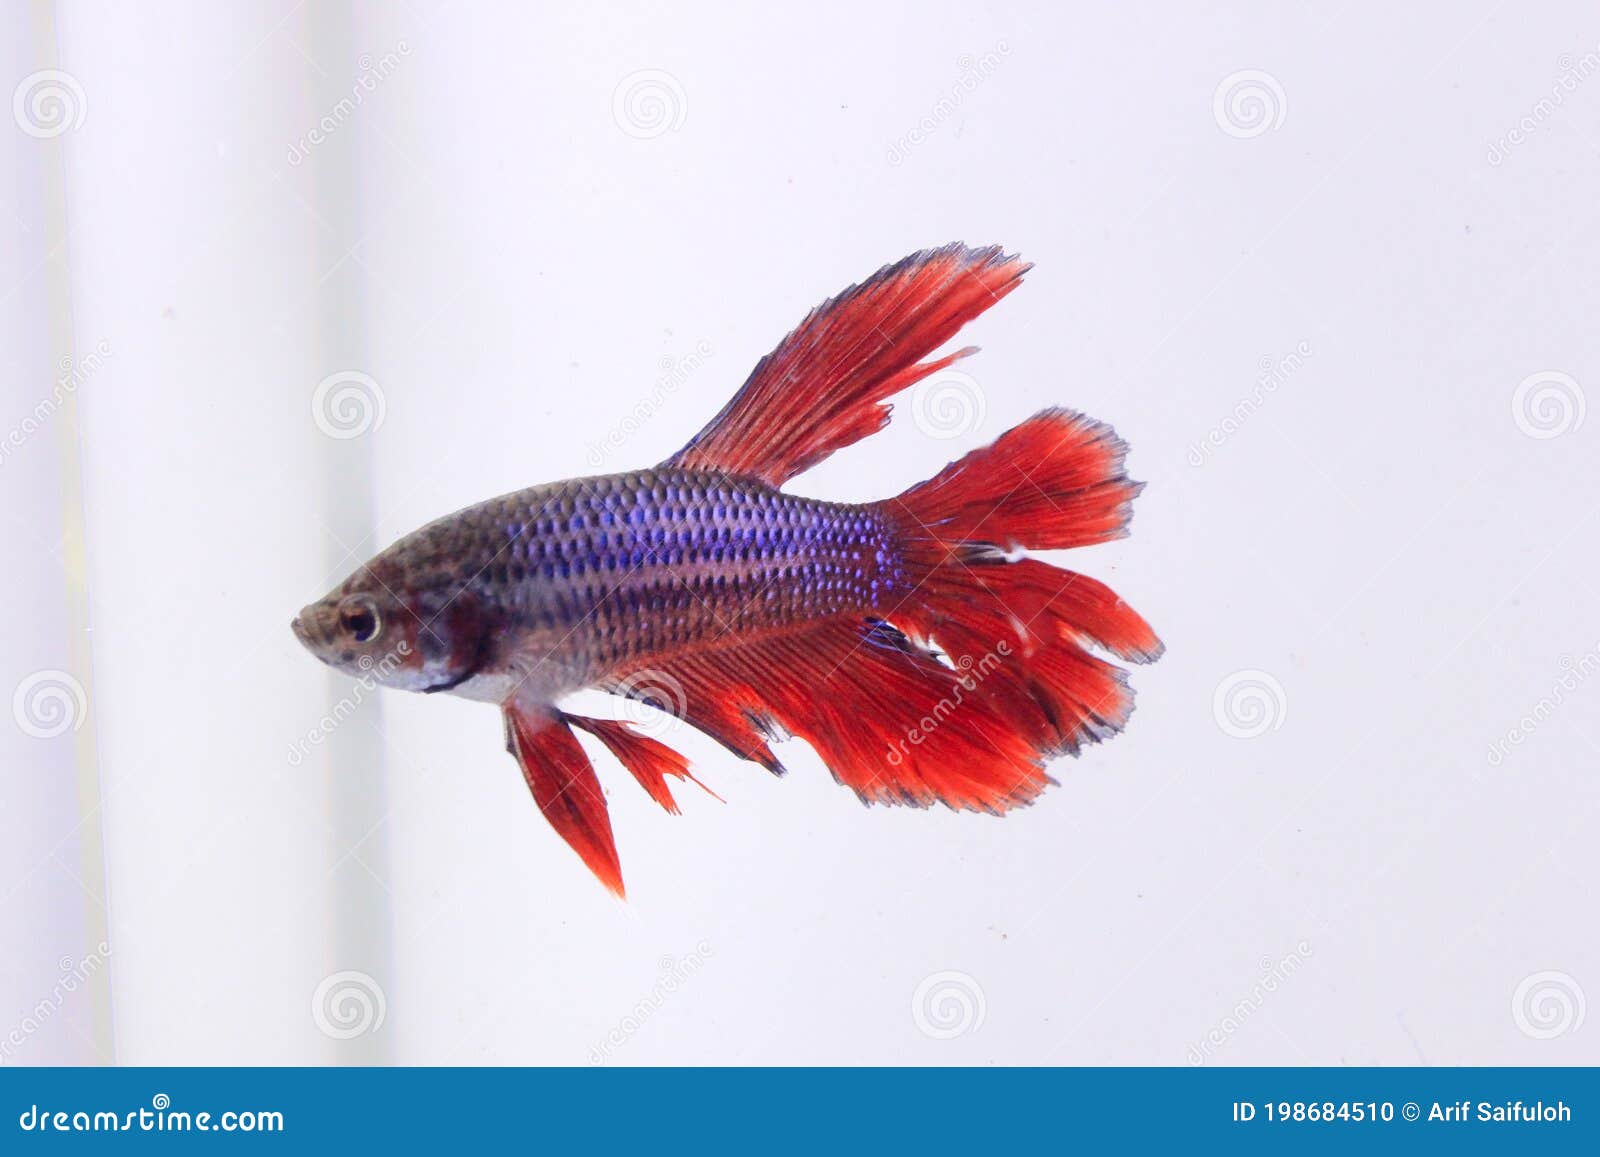 Red Halfmoon Betta Fish. the Betta Fish is Predominantly Red in a Little  Other Color Combination, with a Tail that Resembles a Stock Photo - Image  of beauty, fight: 198684510